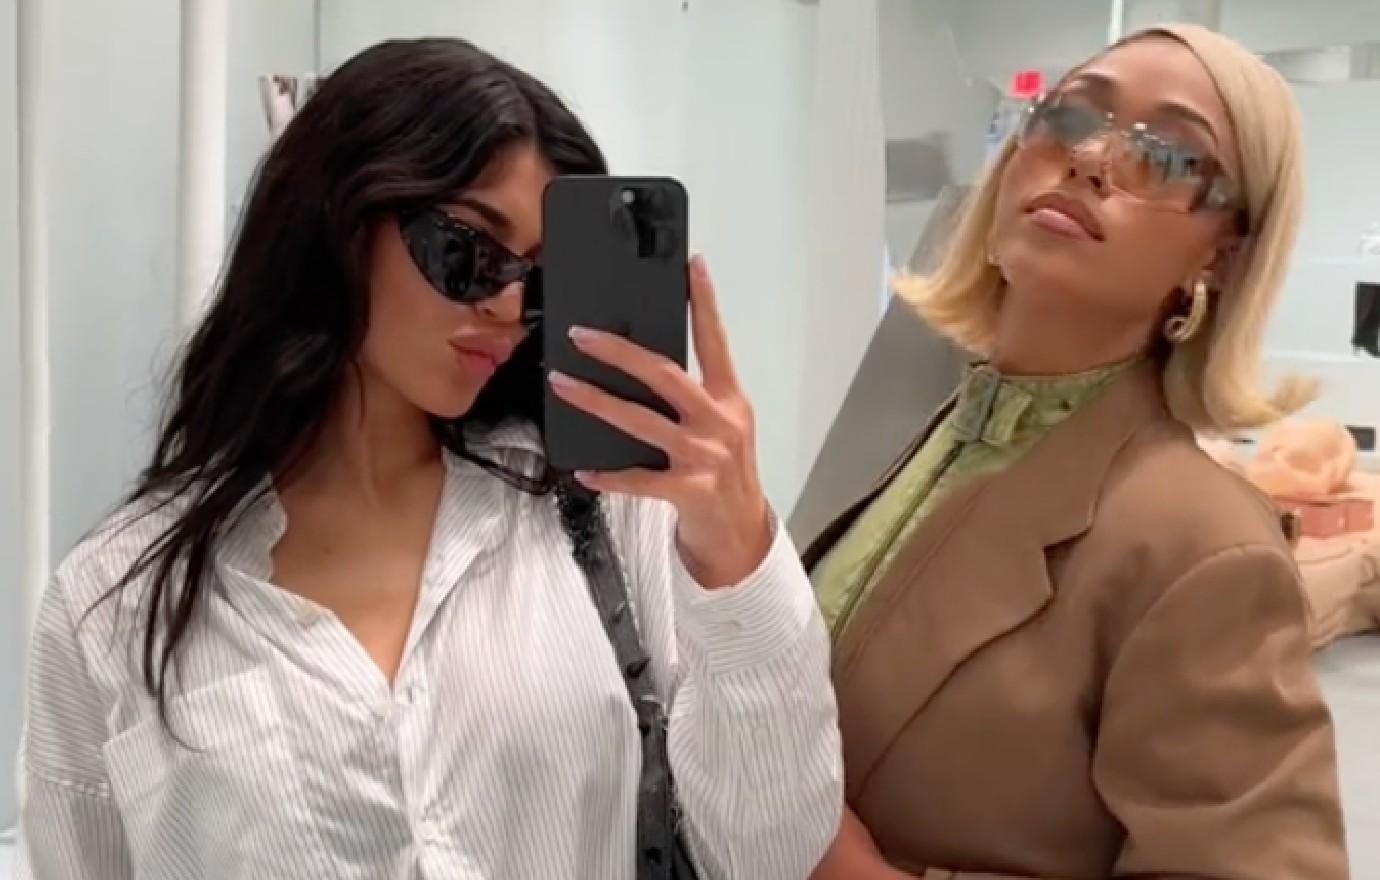 Kylie Jenner Fans Rejoice Over Reunion With Jordyn Woods After Fallout